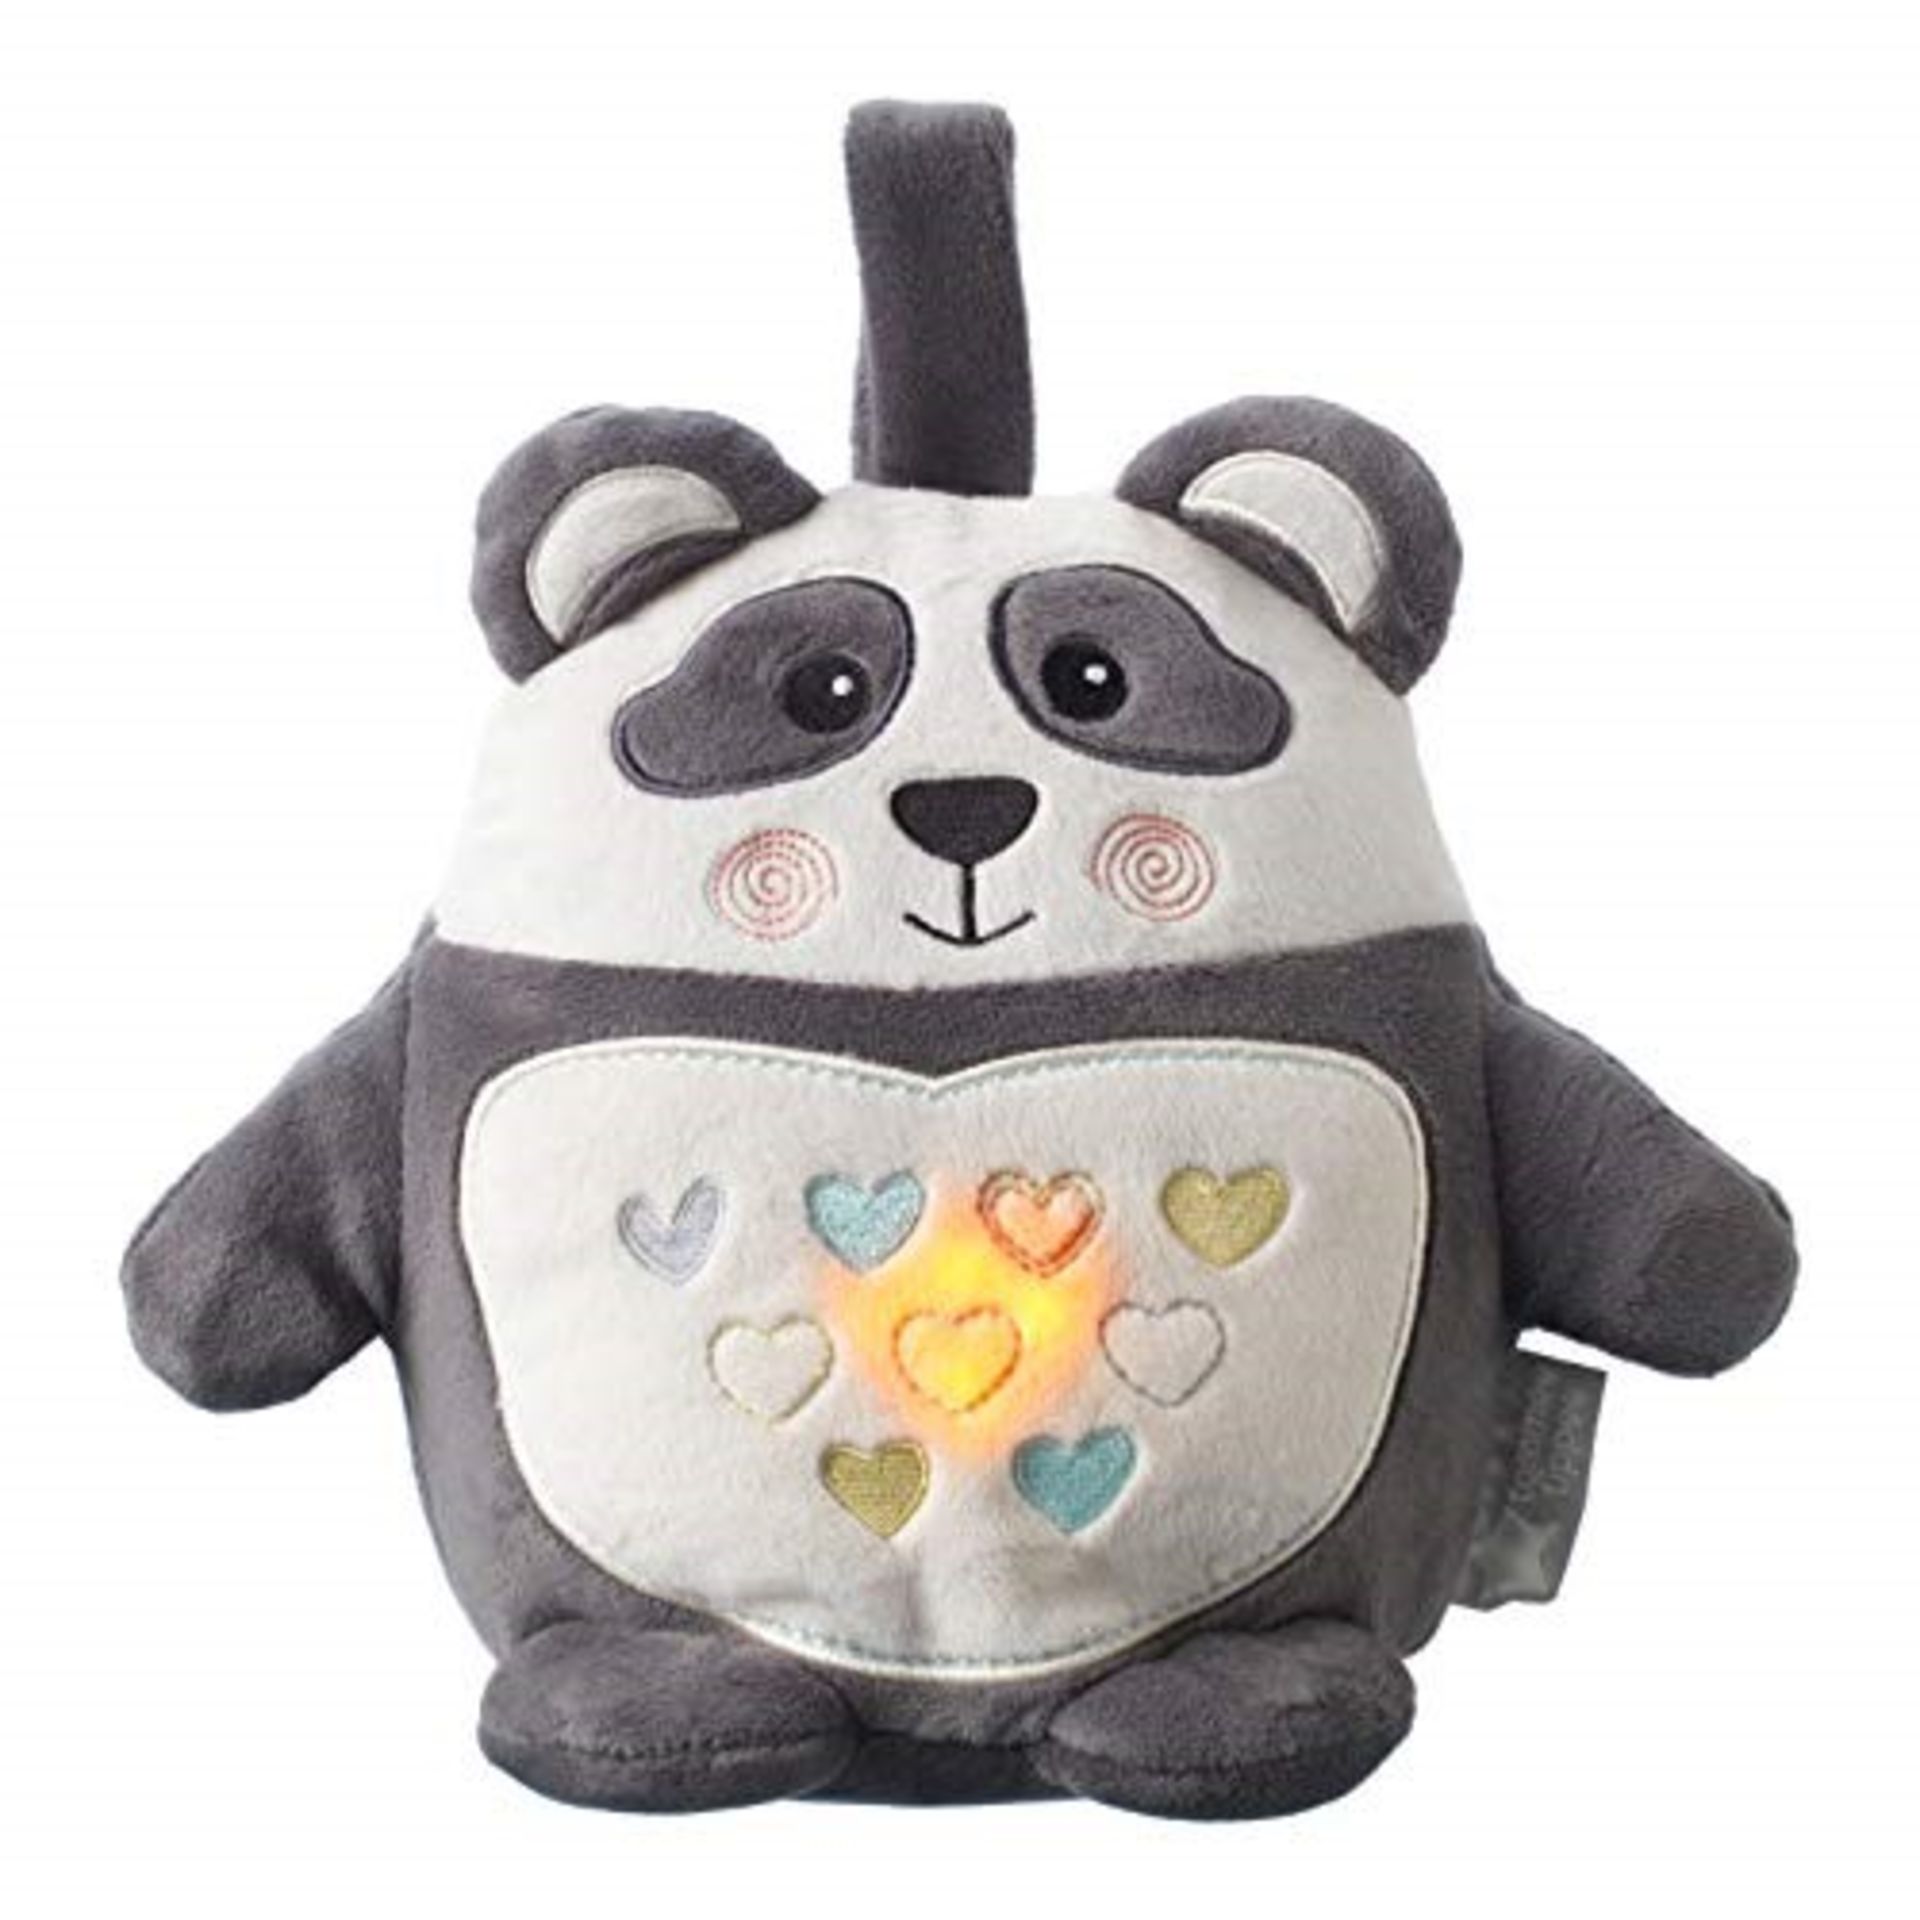 Tommee Tippee Pip the Panda Rechargeable Light and Sound Sleep Aid